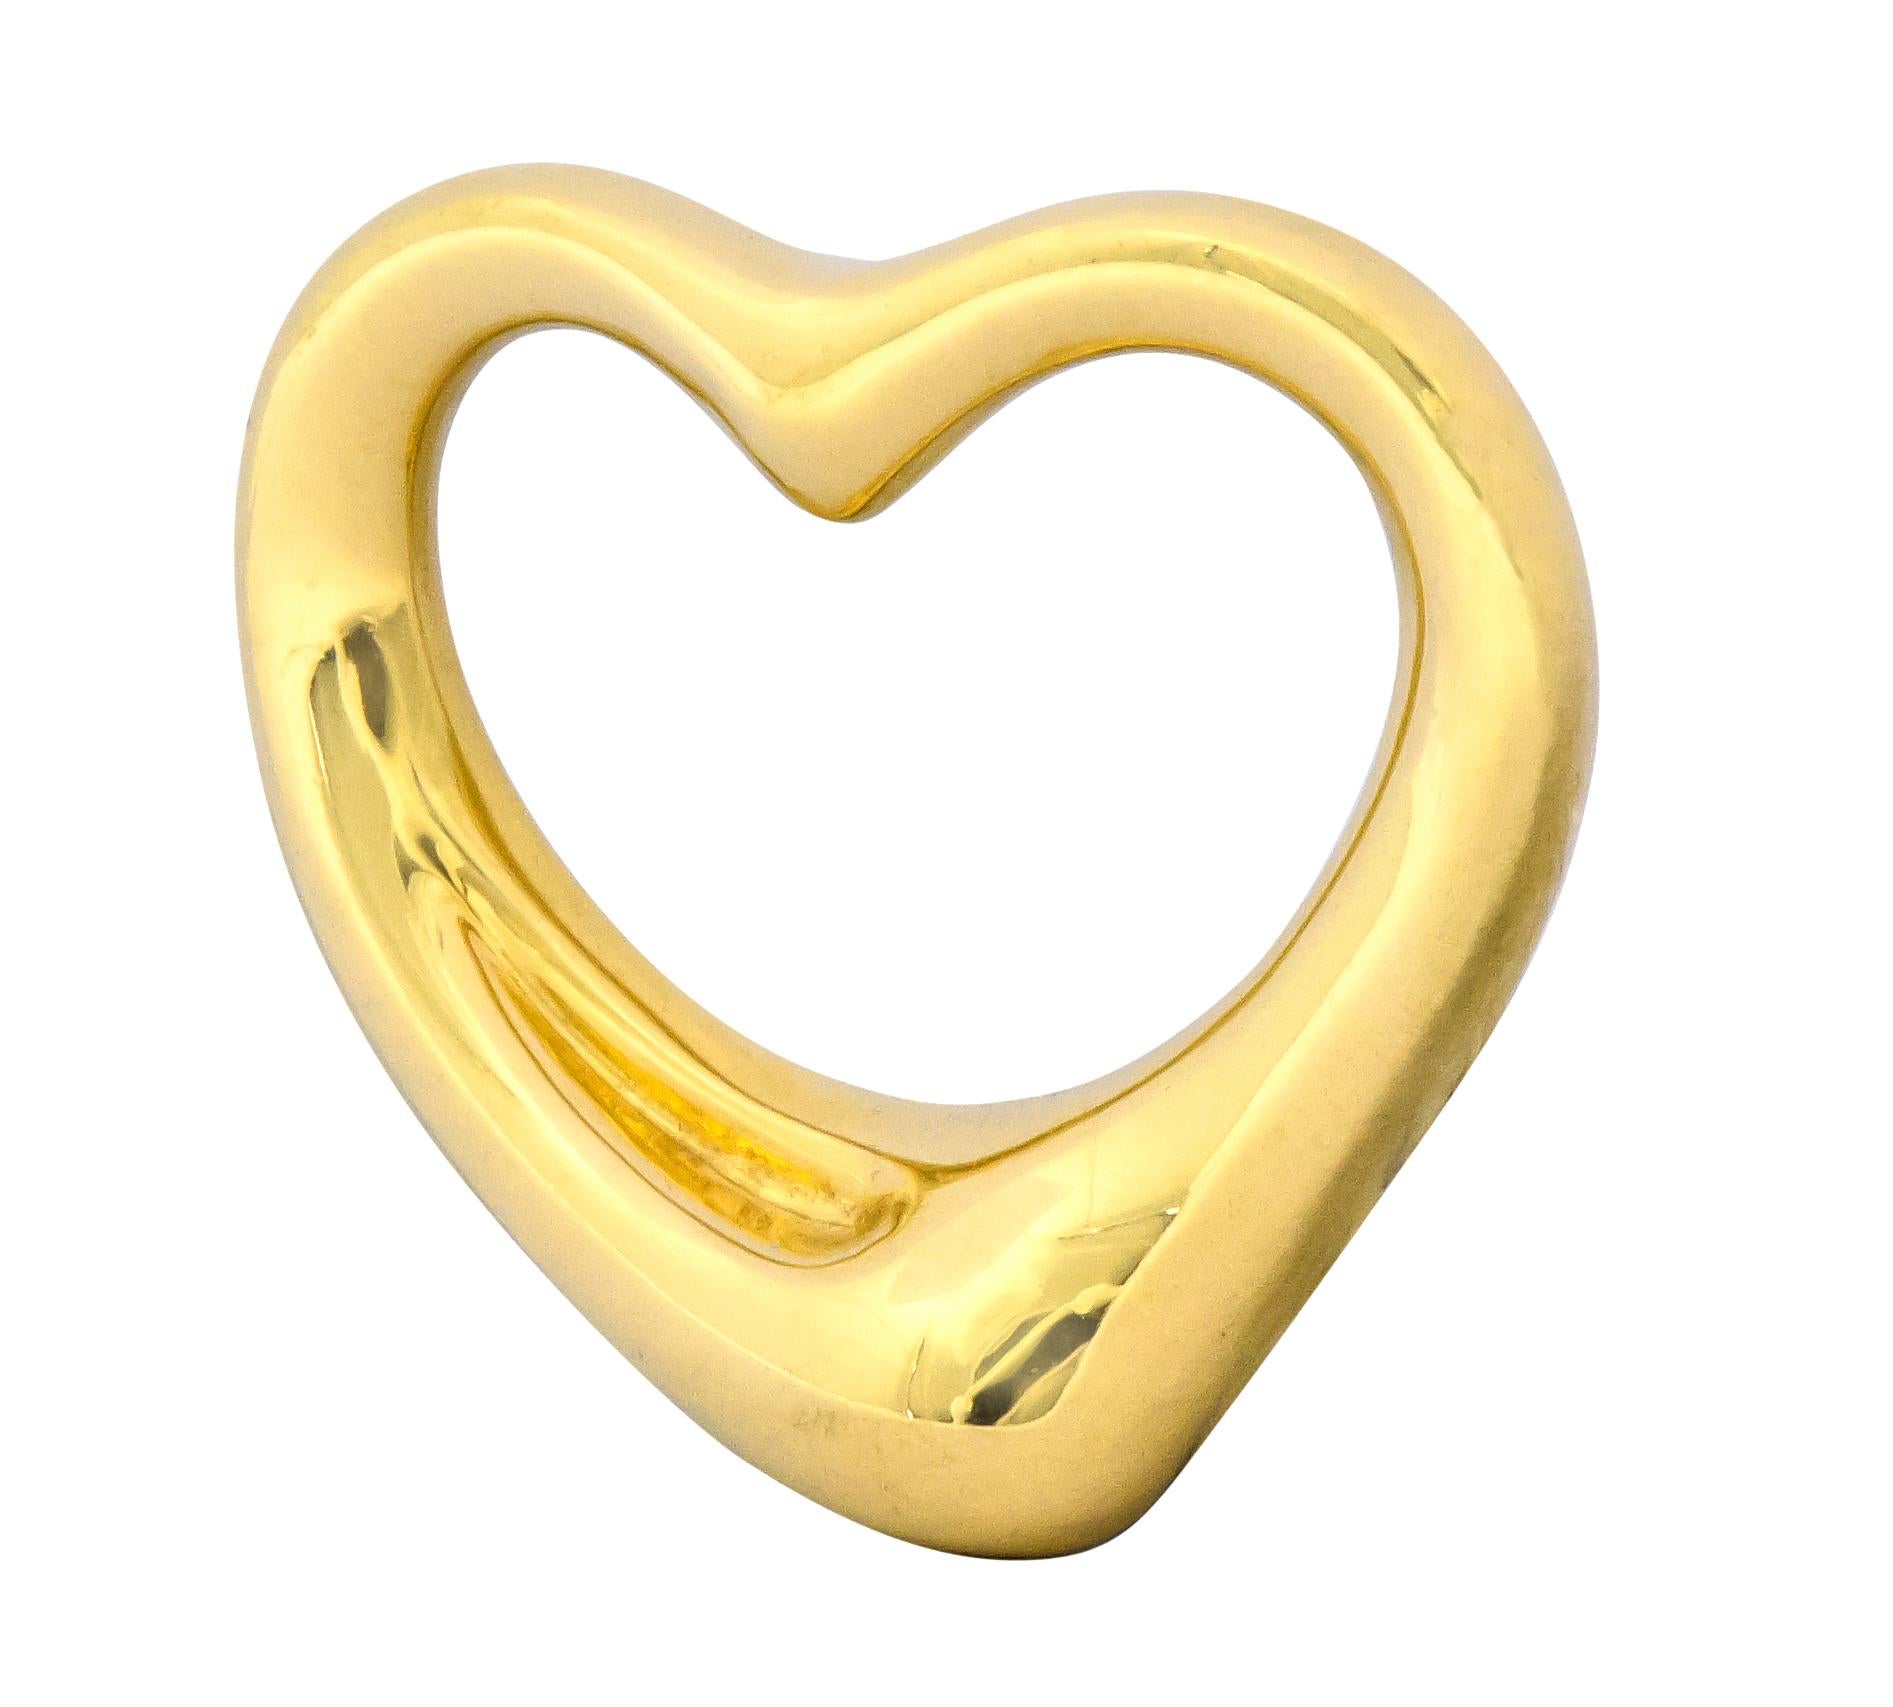 Pendant is designed as a gleaming open heart motif

Fully signed Tiffany & Co. Elsa Peretti Spain

Stamped 750 for 18 karat gold

From the vintage Open Heart collection, circa 1990s

Measures: 1 x 1 inch (25.0 mm)

Total weight: 8.0 grams

Romantic.